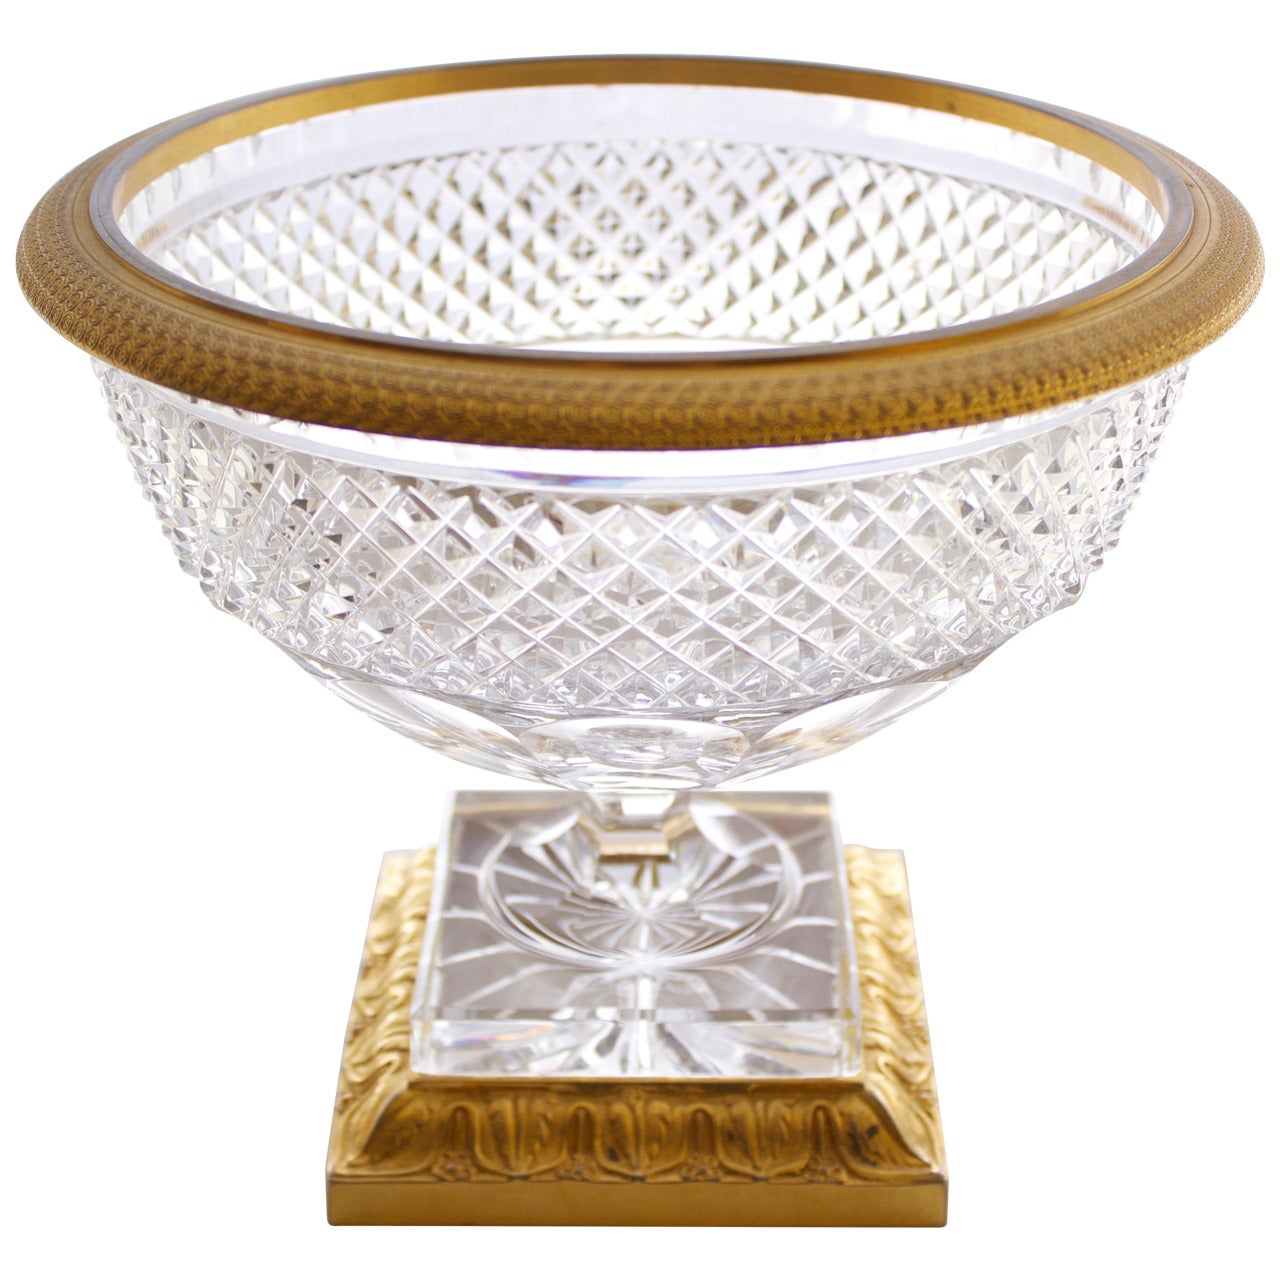 French Baccarat Centerpiece with Ormolu Mounts